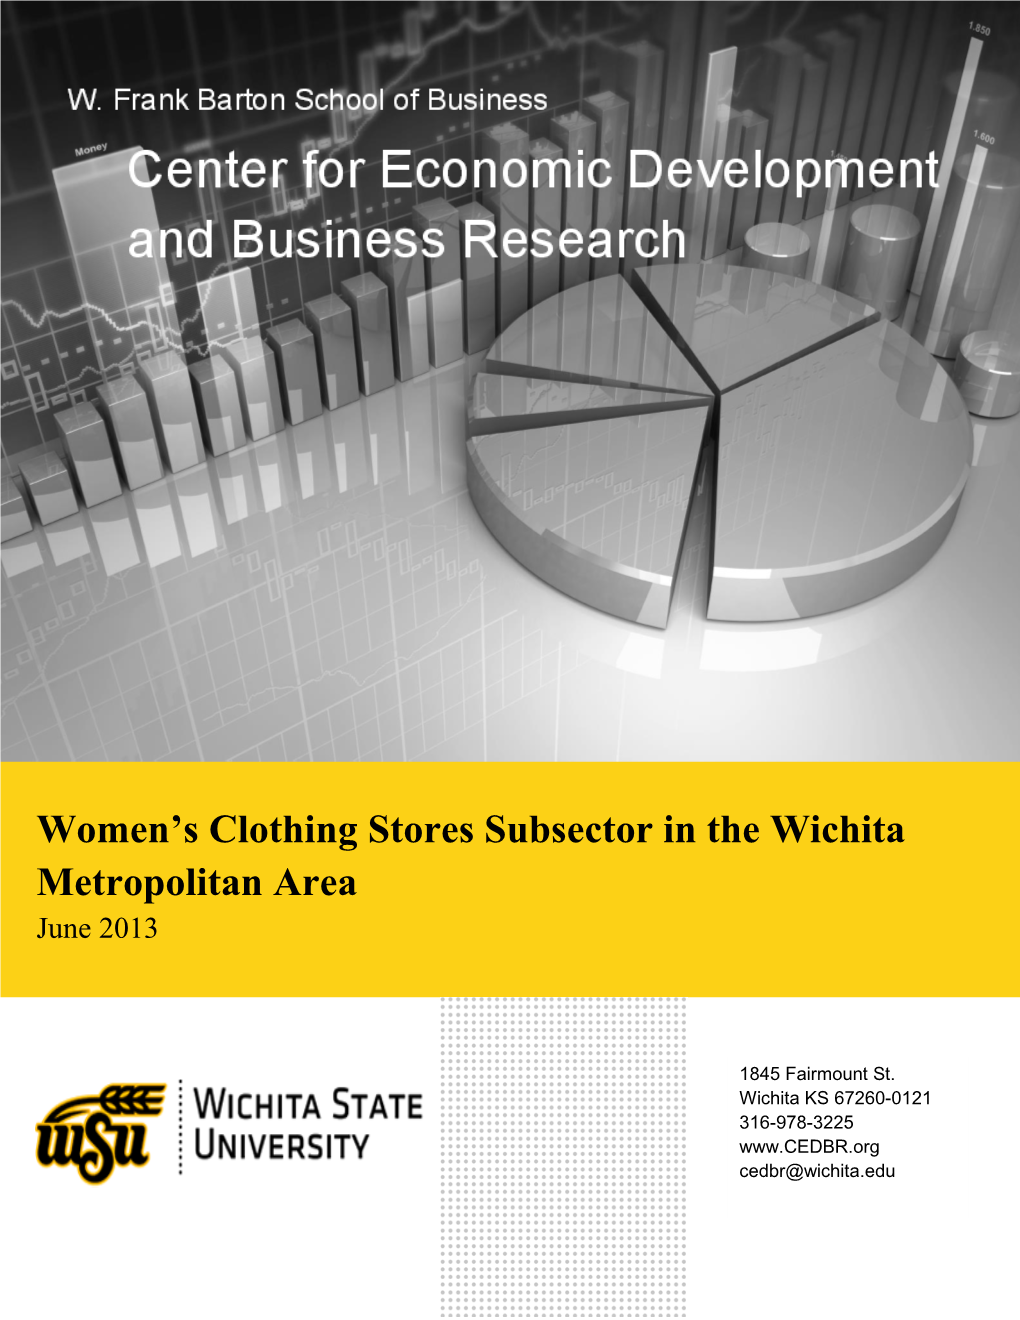 Women's Clothing Stores Report